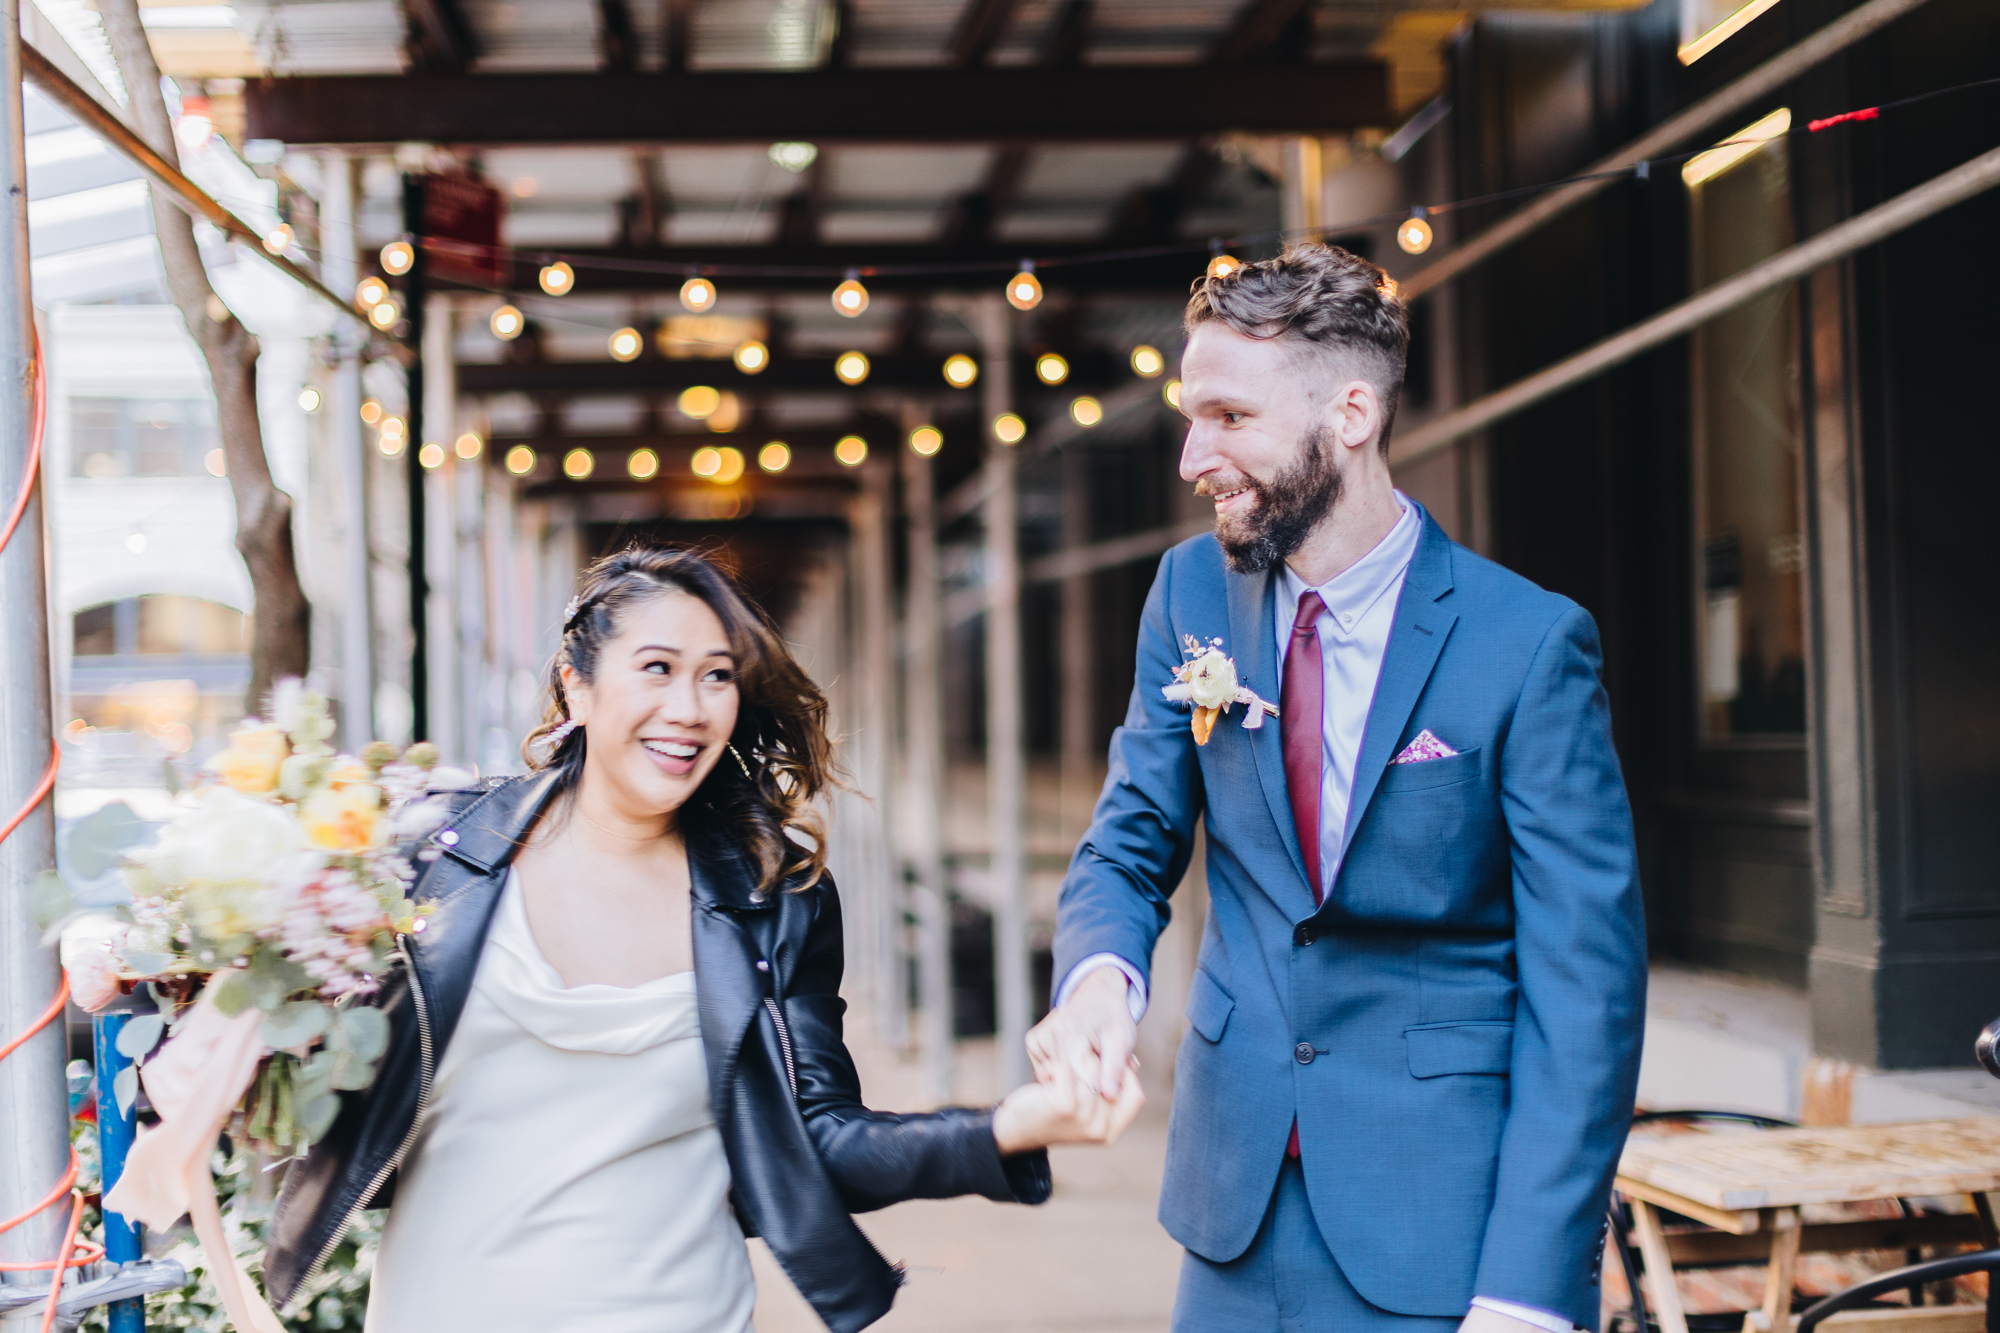 Loving Fall DUMBO Elopement with New York views and foliage